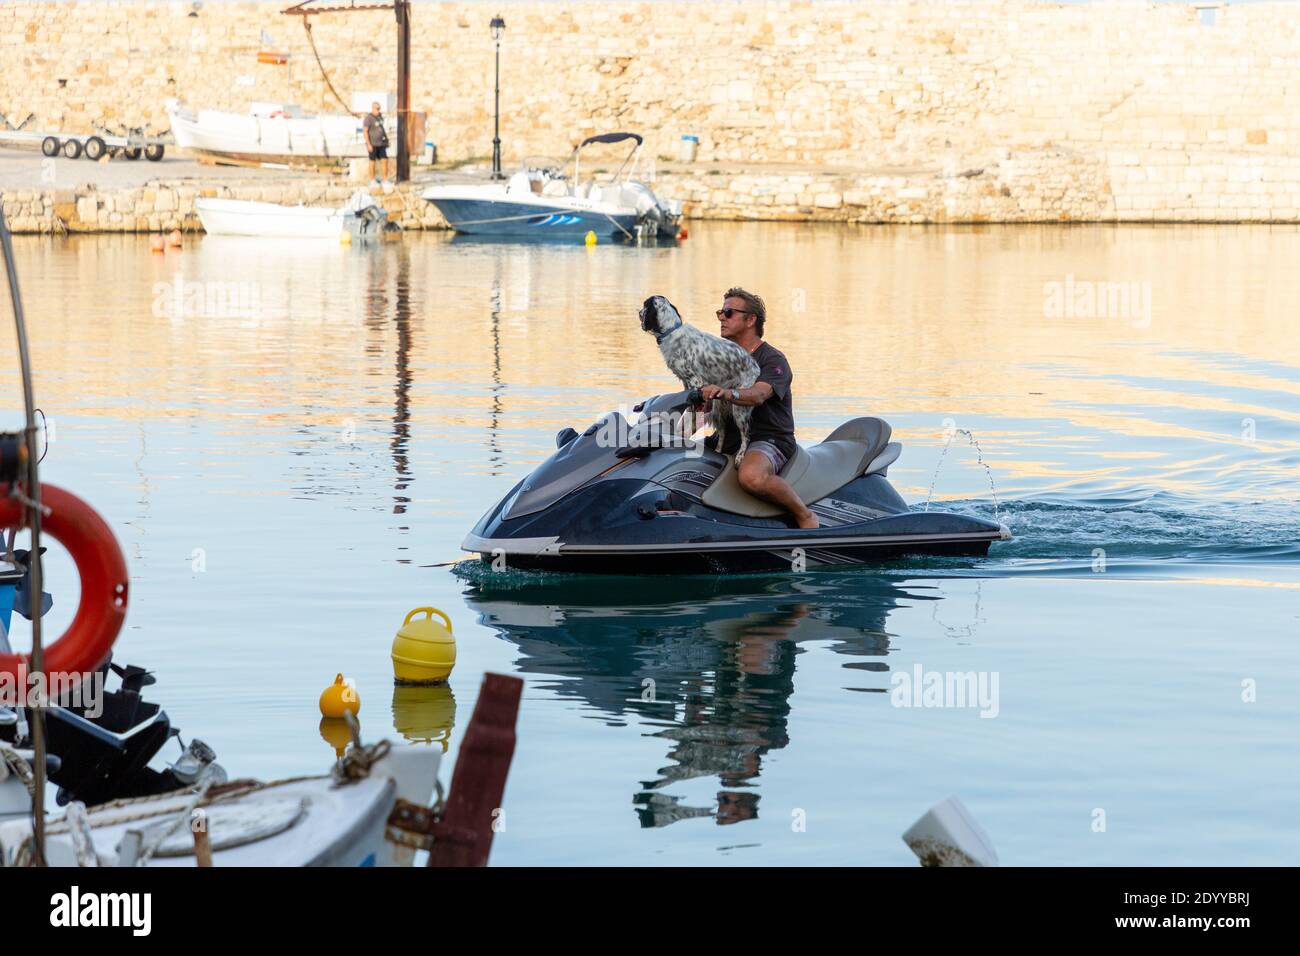 A man and a dog on jetski at the Old Venetian Harbour, Rethymno, Crete, Greece Stock Photo